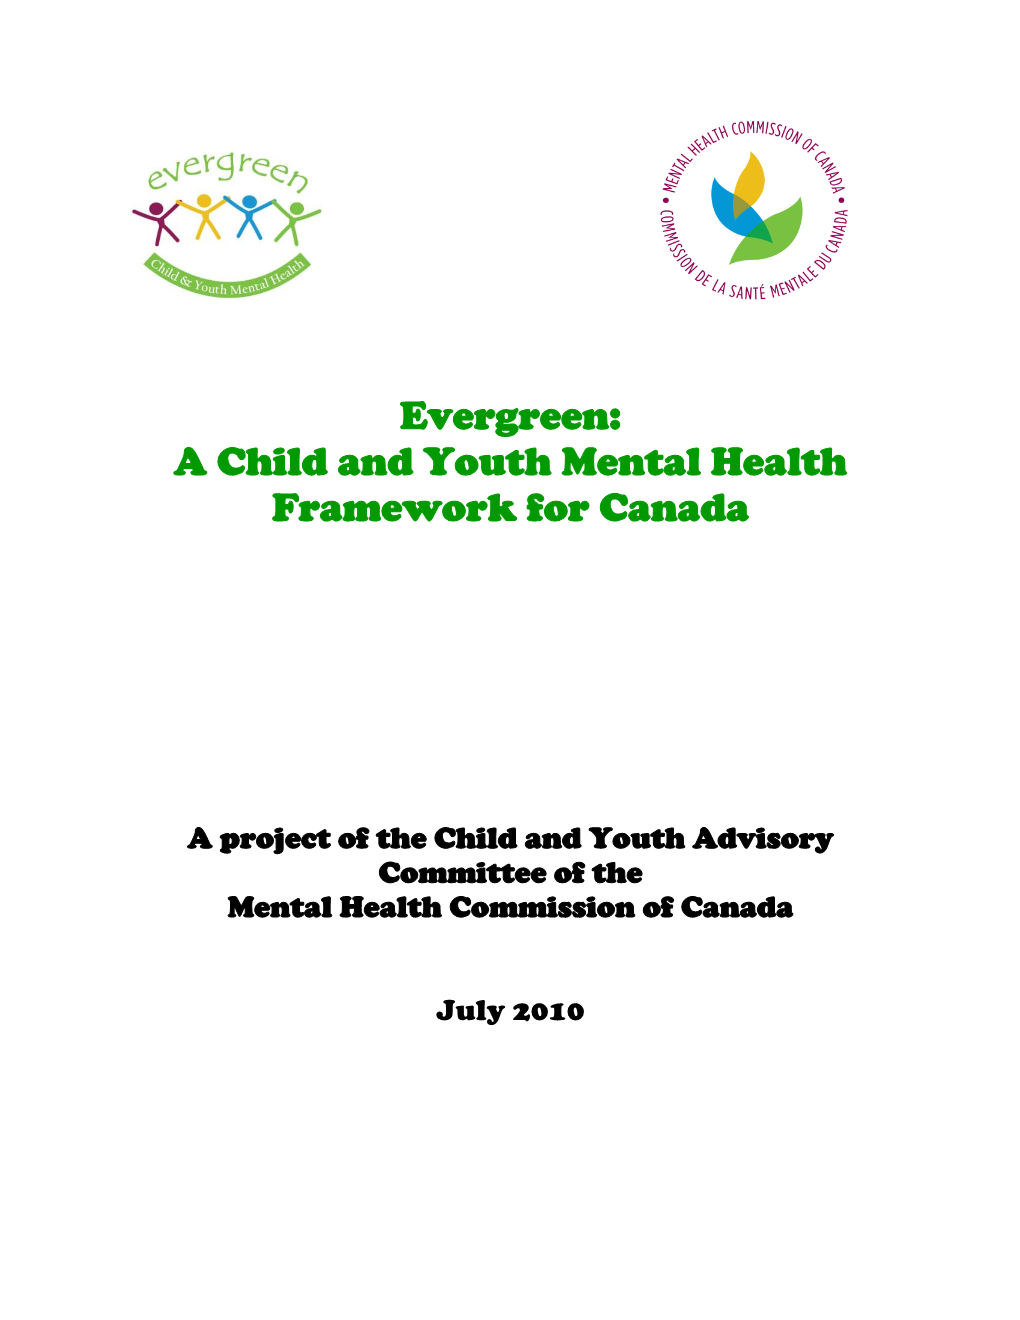 Evergreen: a Child and Youth Mental Health Framework for Canada